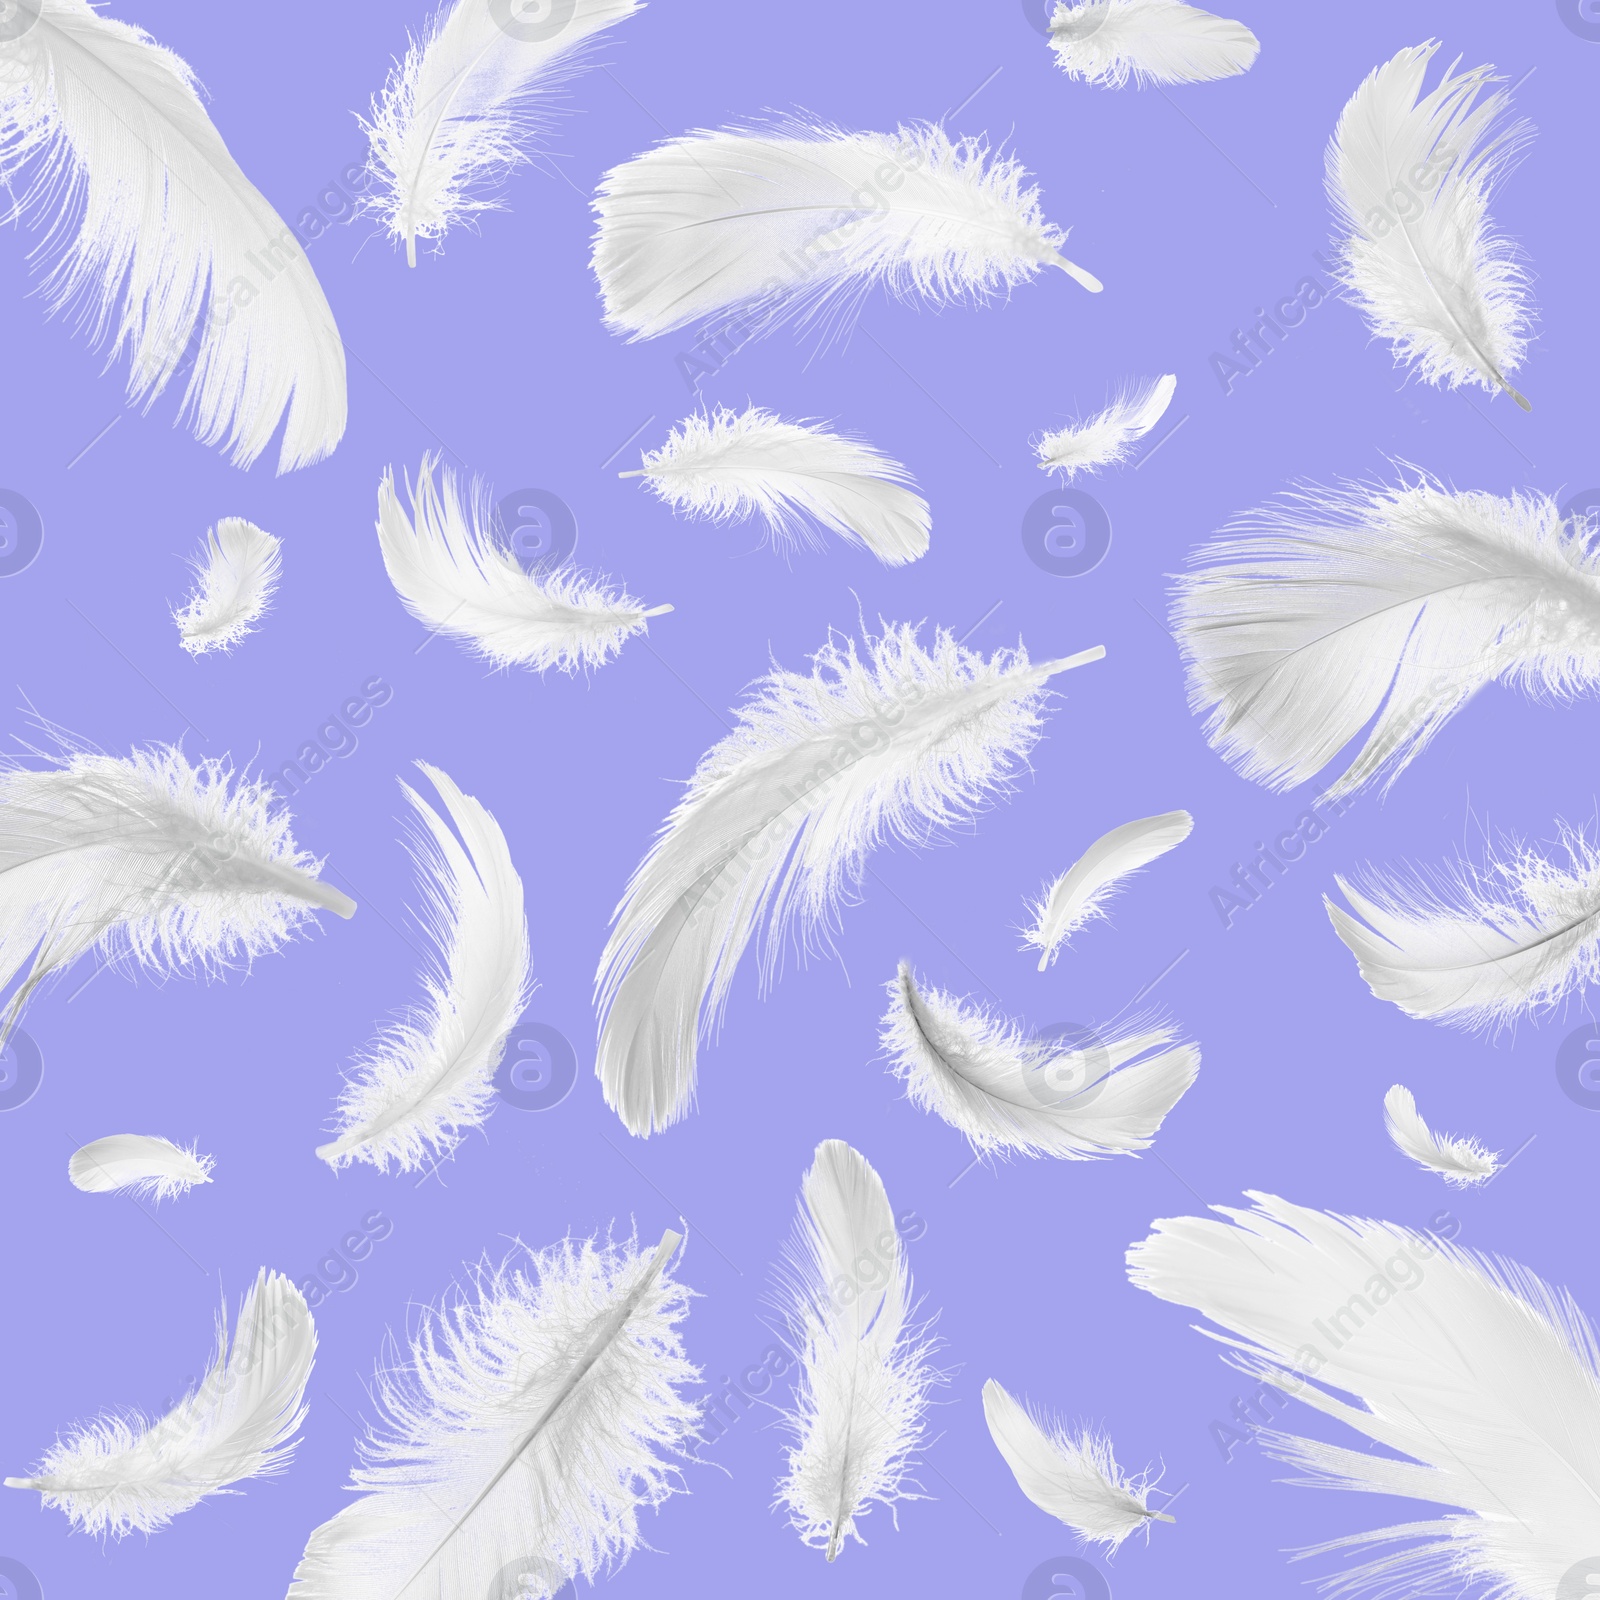 Image of Fluffy bird feathers falling on violet blue background